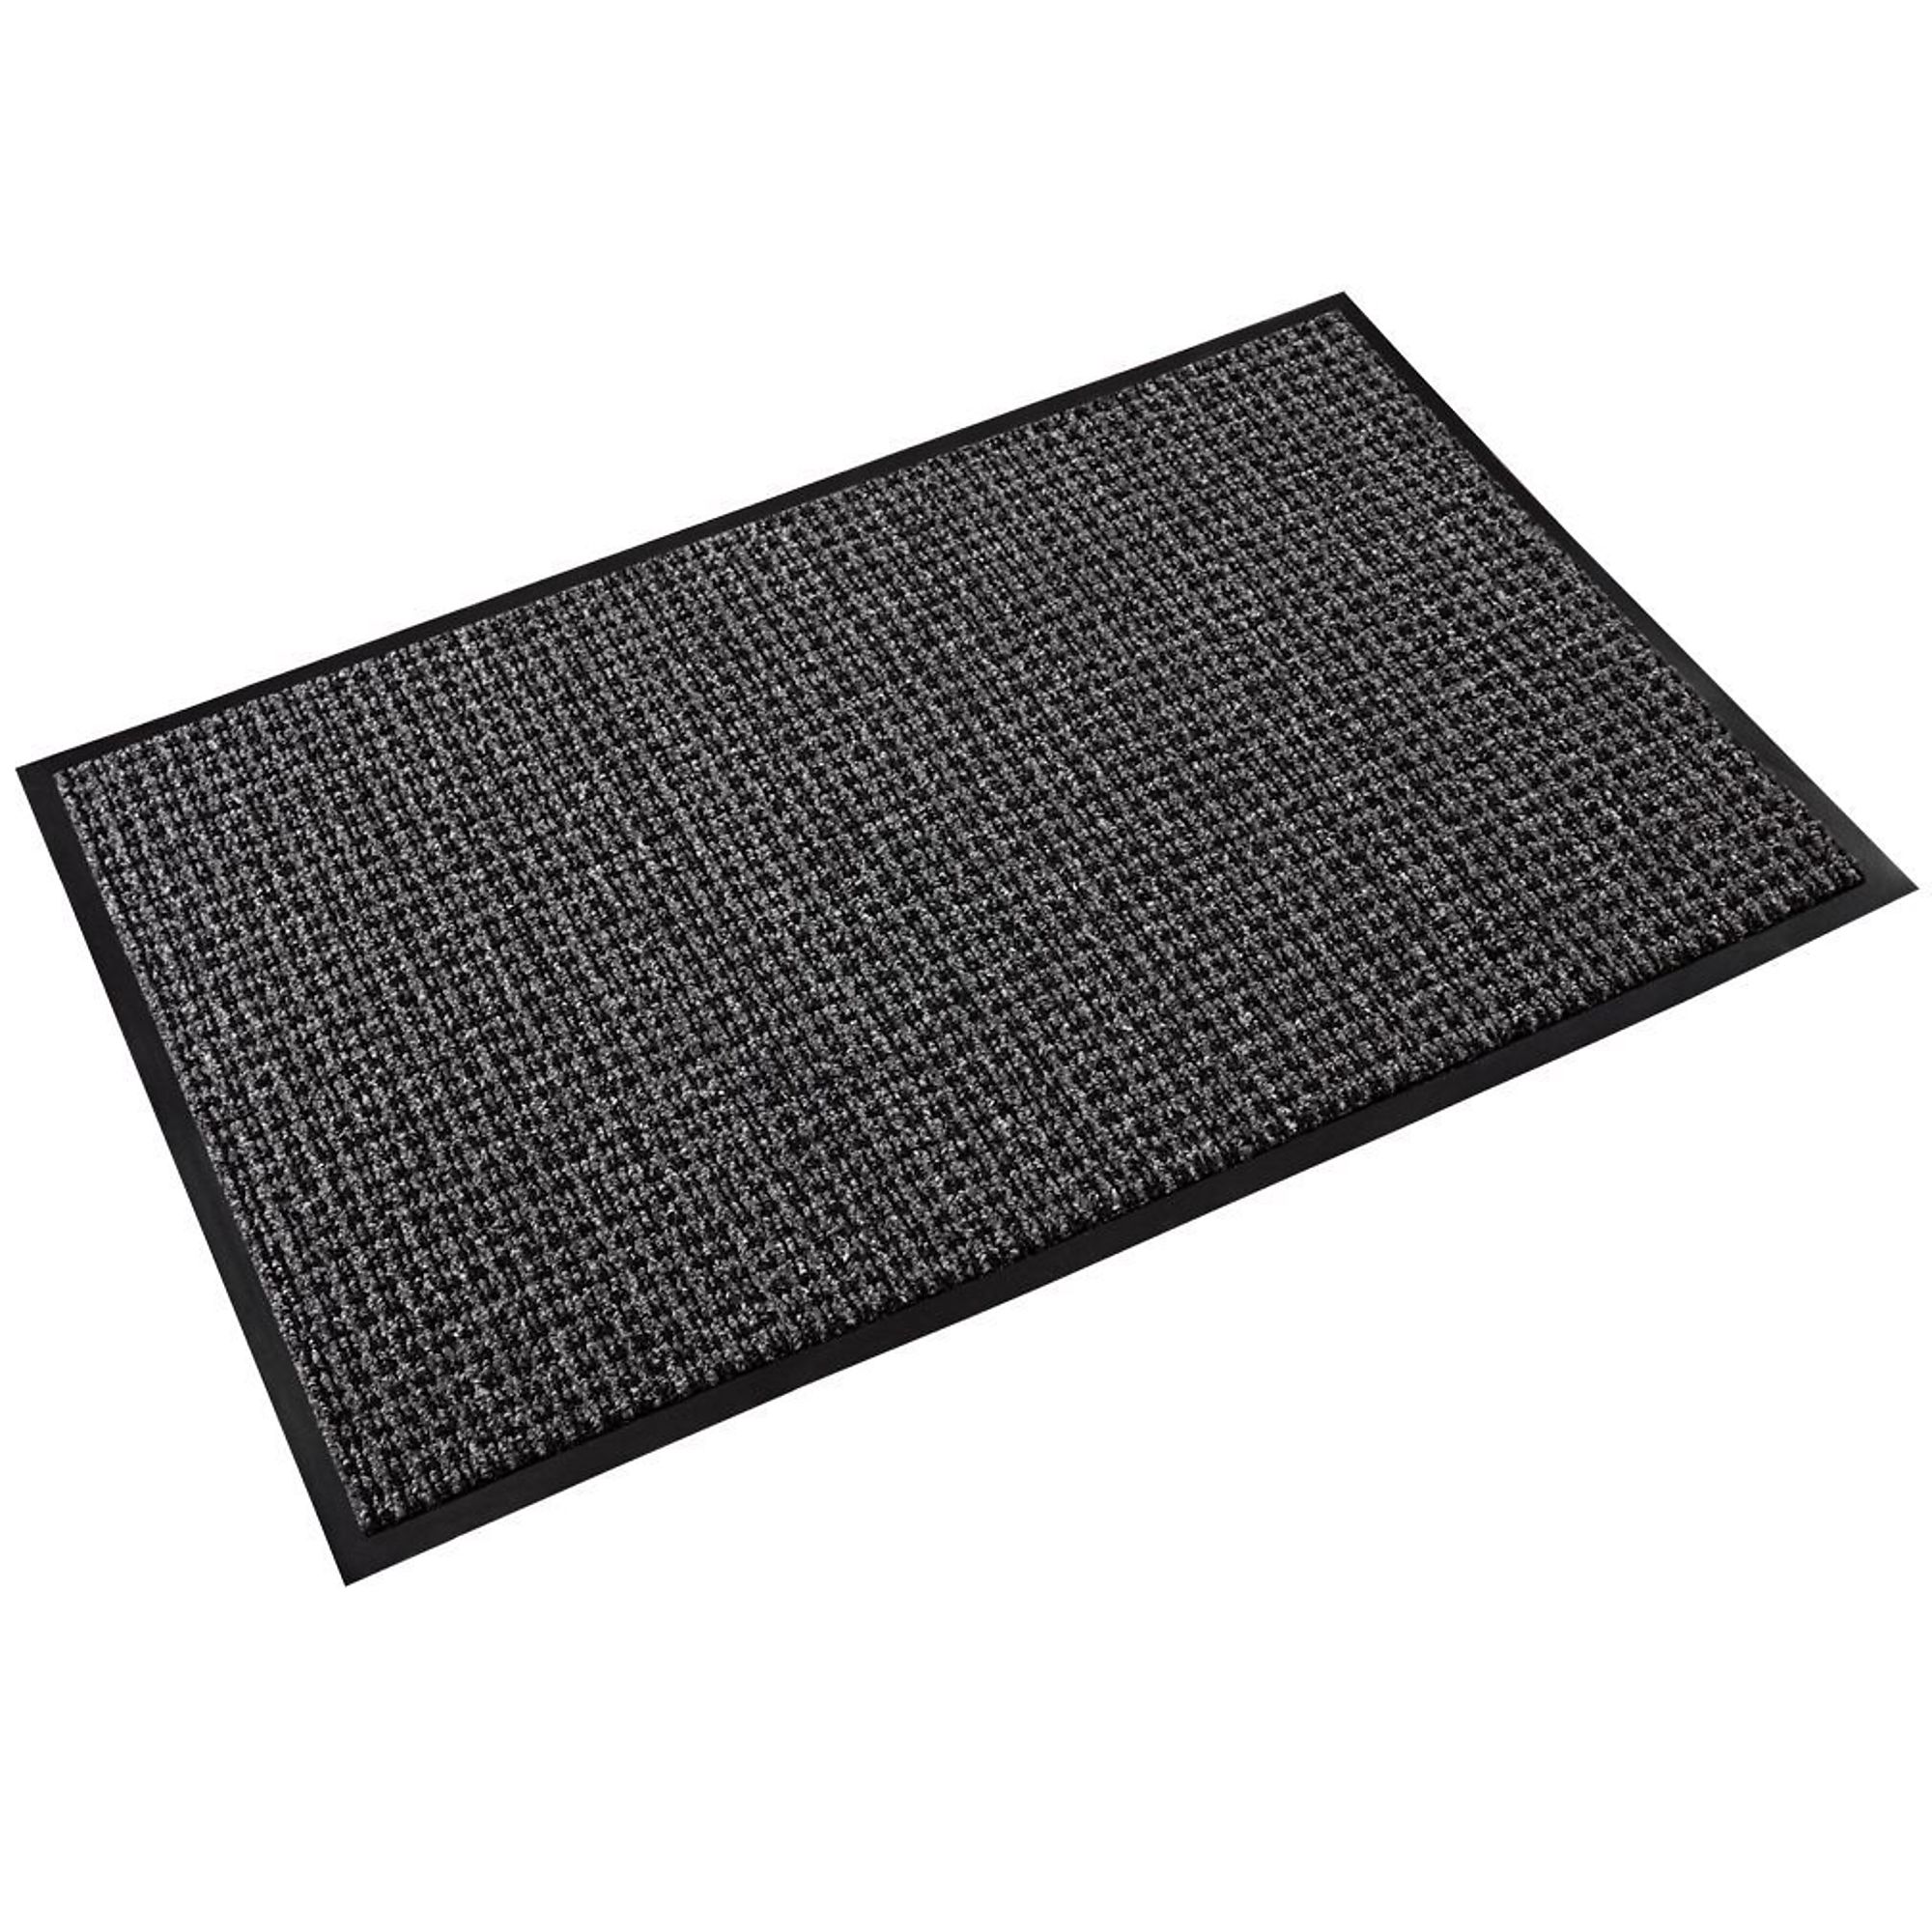 Crown Matting Technologies, Oxford Elite 3ft.x10ft. Black/Gray, Width 36 in, Length 120 in, Thickness 7/16 in, Model OE 0310GY